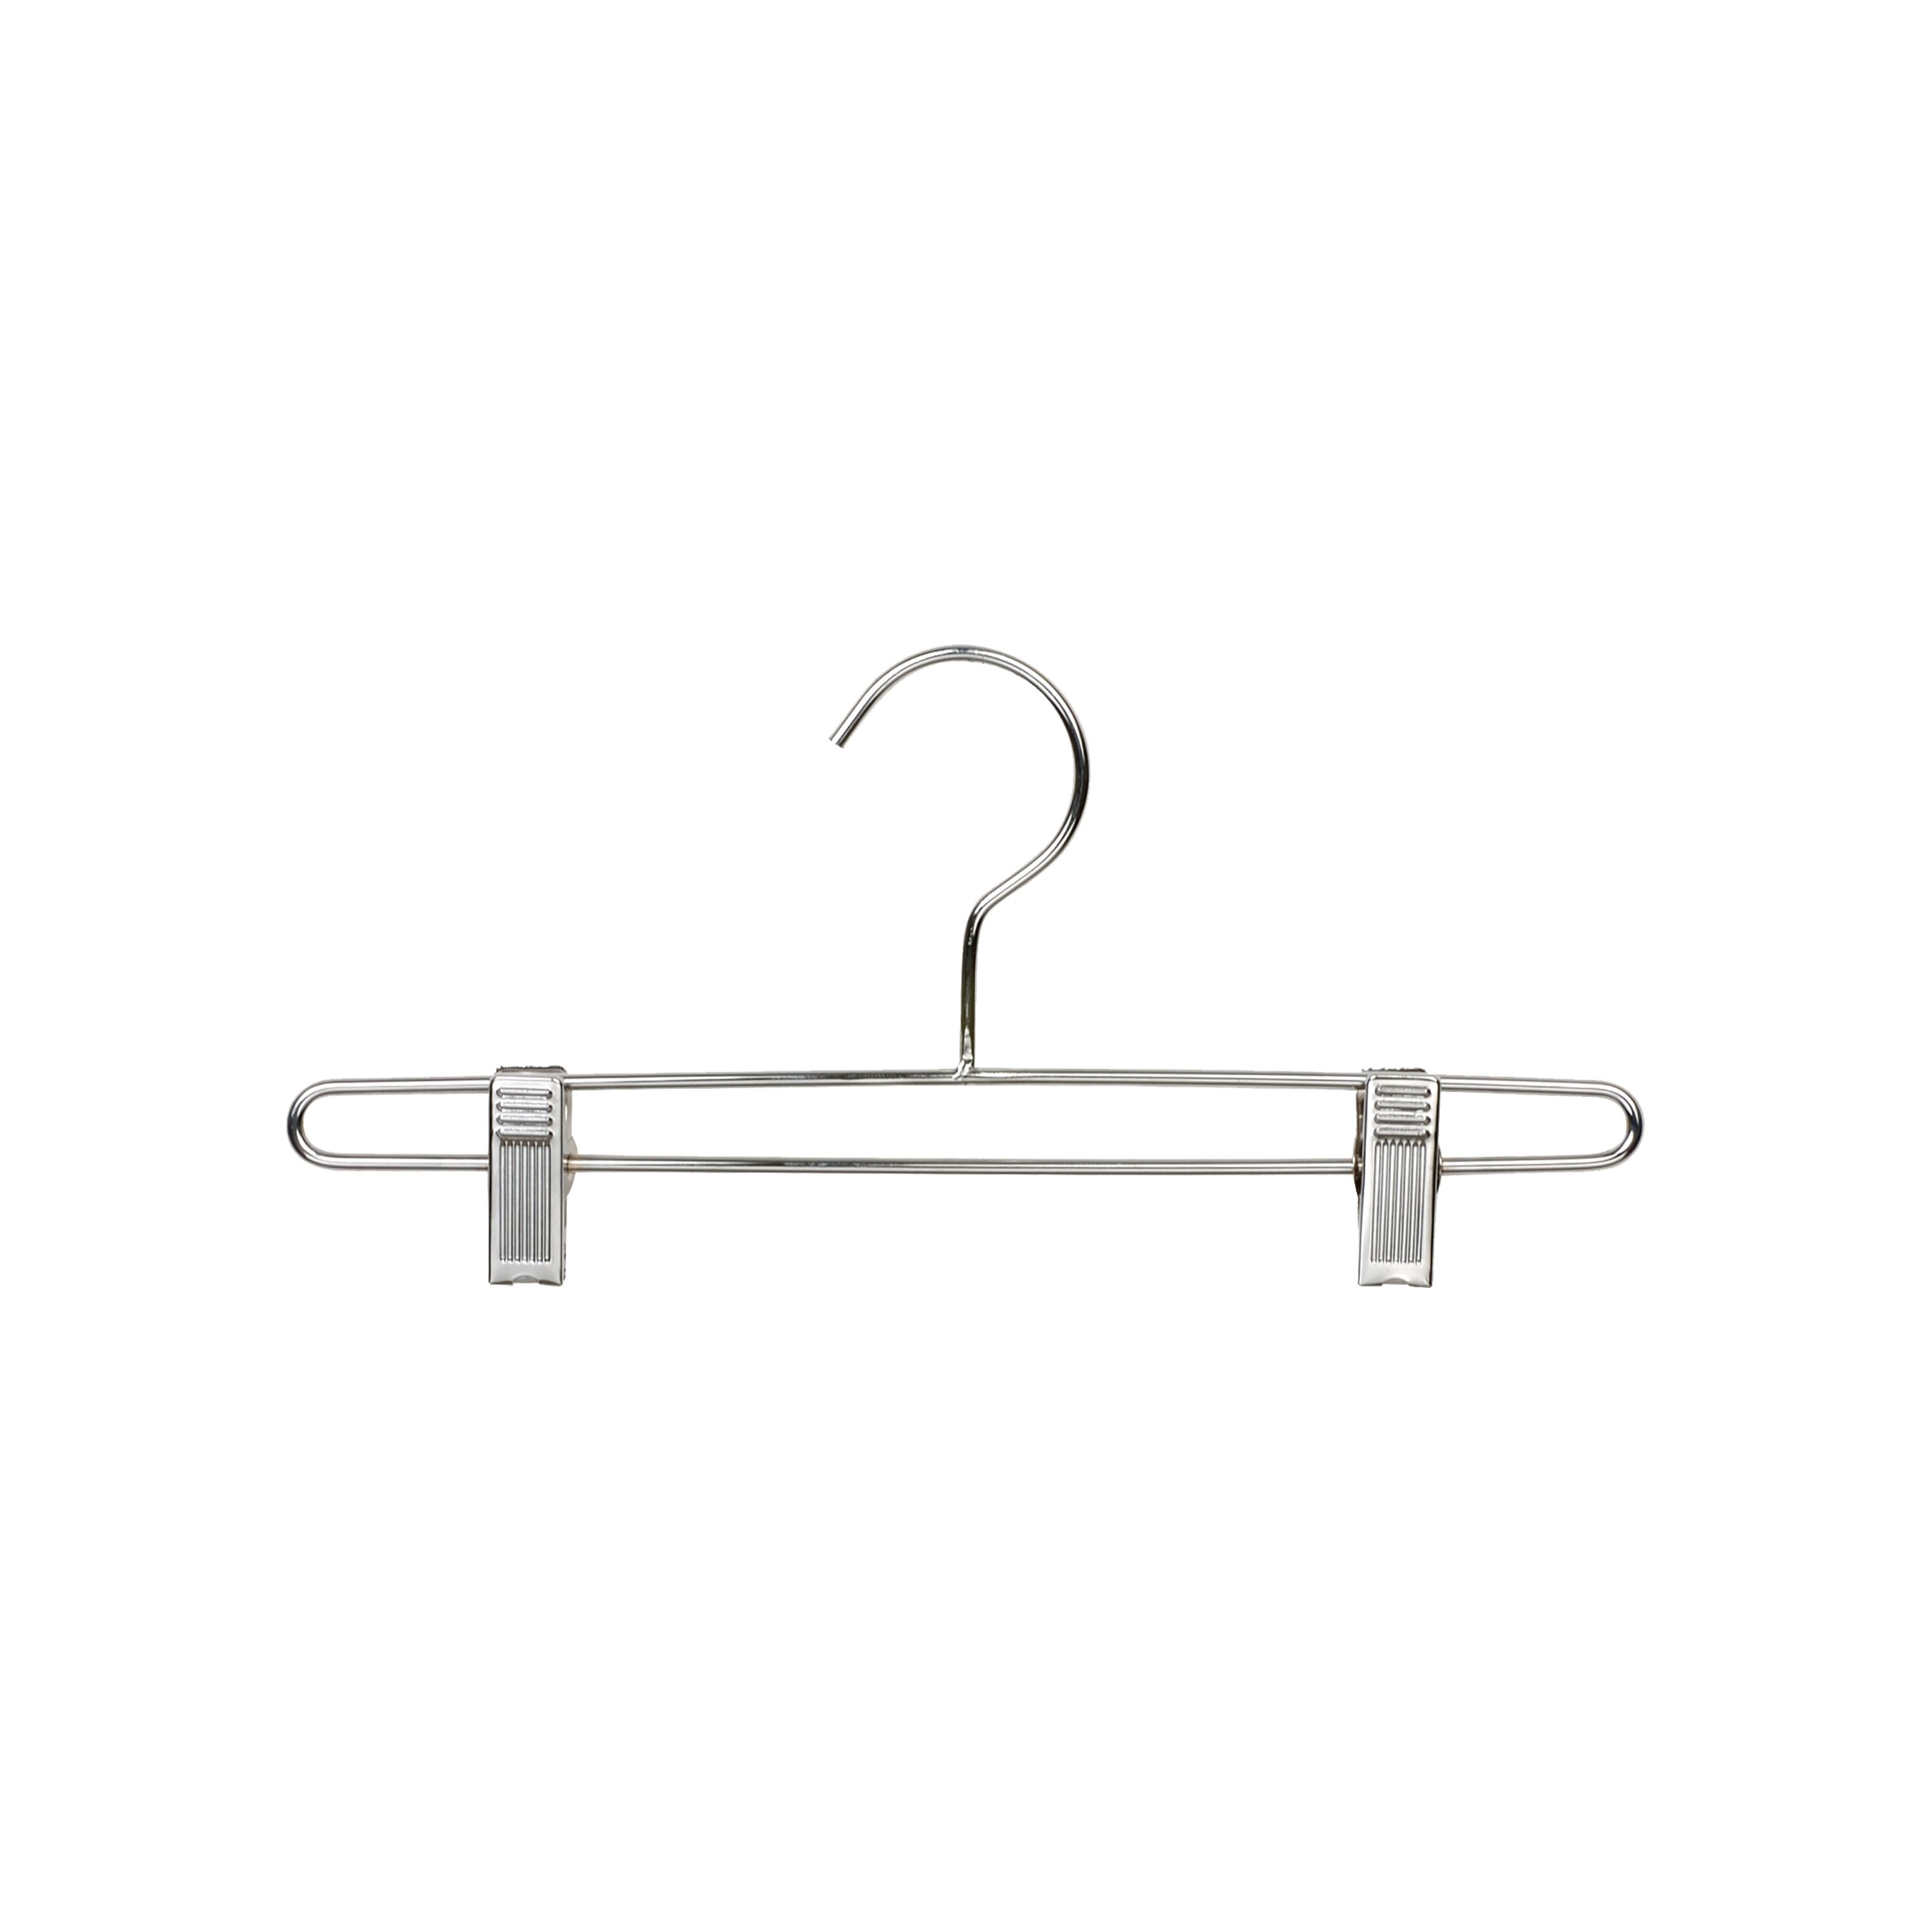 https://ak1.ostkcdn.com/images/products/is/images/direct/a032042ea51f33e8248b54fe532b51e520dd05c3/Chrome-Metal-Kids-Sized-Bottoms-Hanger-with-Clips%2C-12%22-Length-x-3-16%22-Round-Width-Box-of-25.jpg